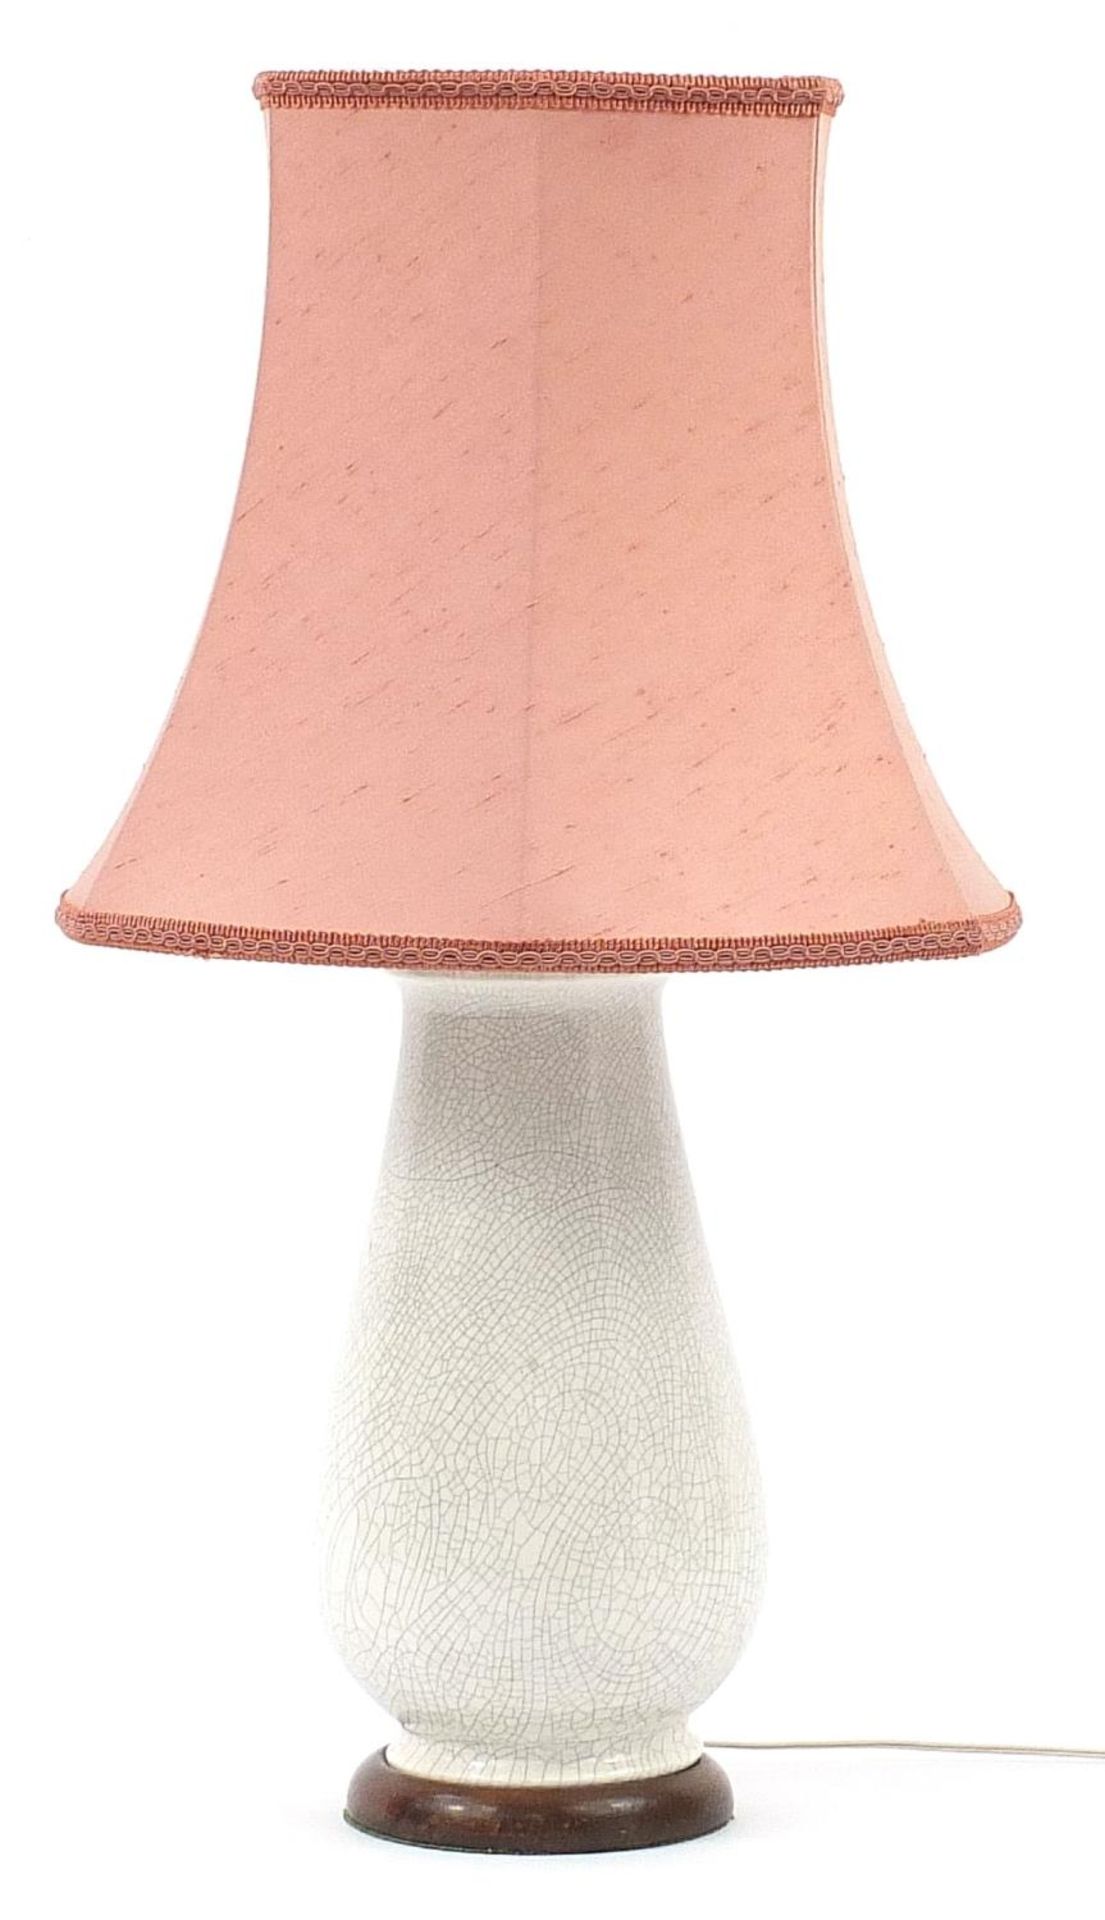 Chinese Ge ware style vase table lamp with silk lined shade, 66cm high :For Further Condition